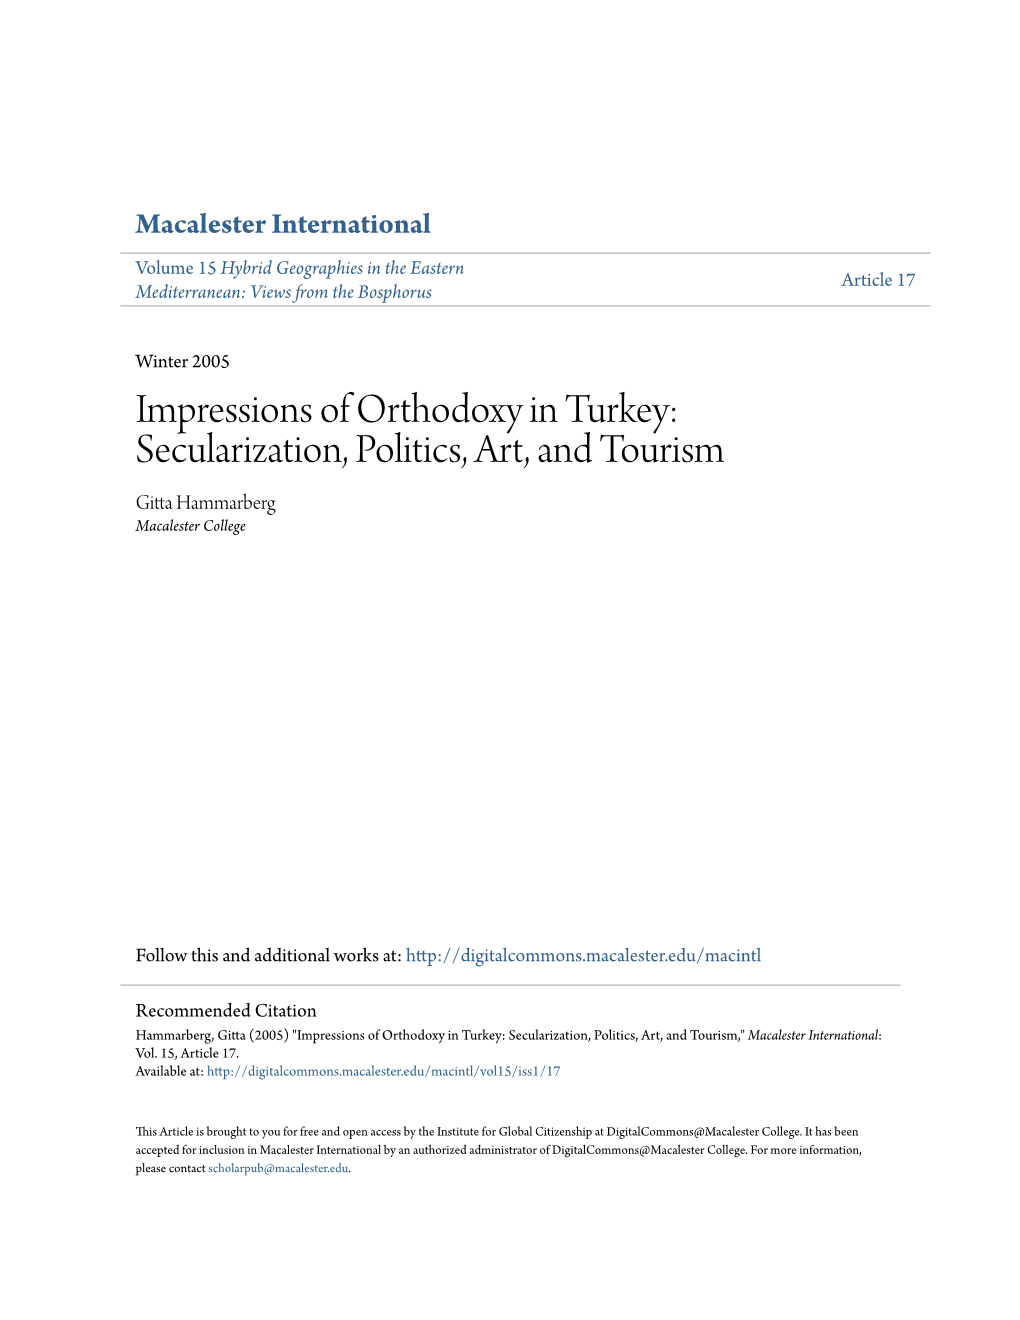 Impressions of Orthodoxy in Turkey: Secularization, Politics, Art, and Tourism Gitta Hammarberg Macalester College